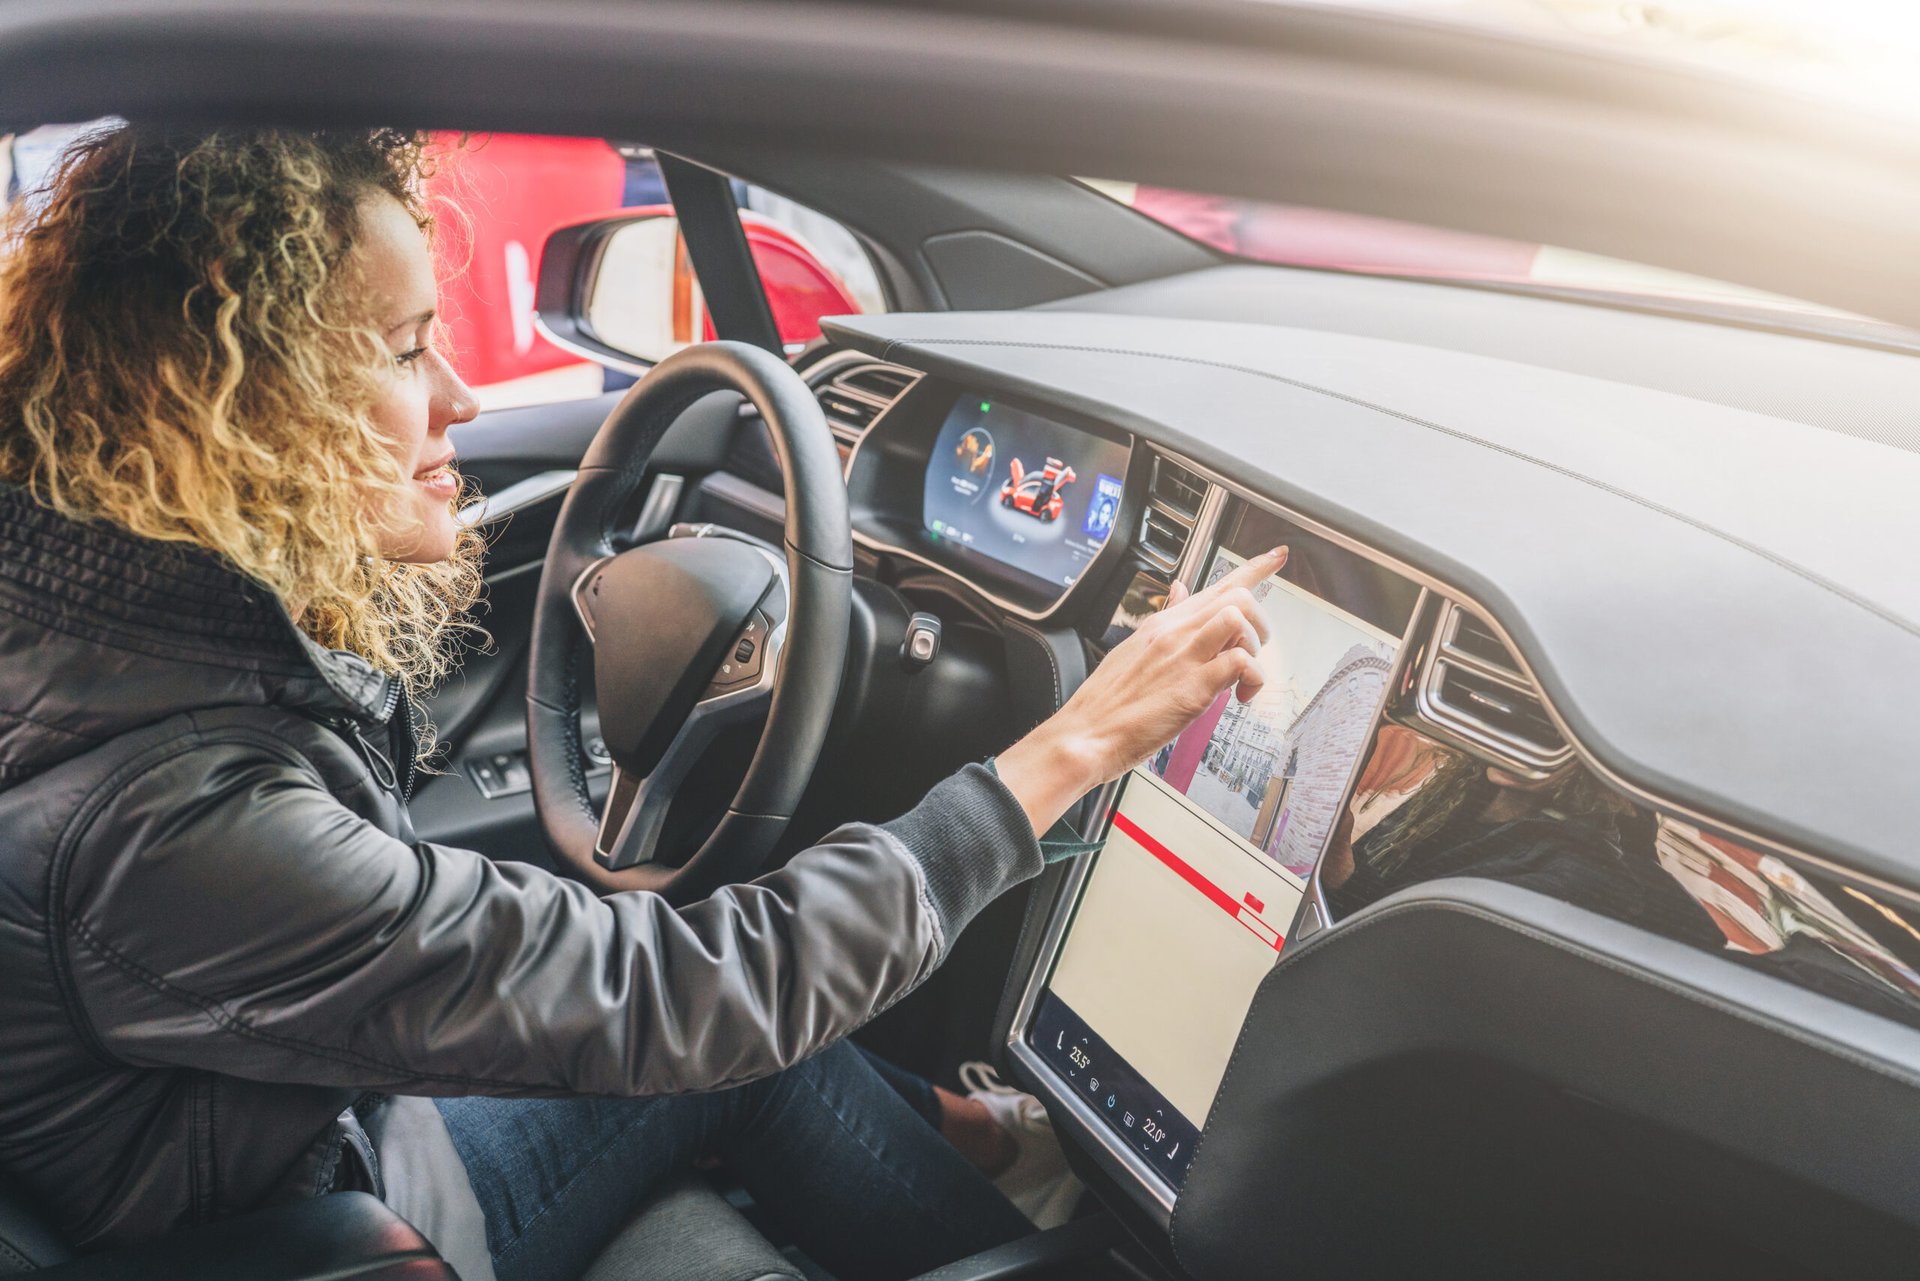 Drivers Will Pay More for These 5 Car Features